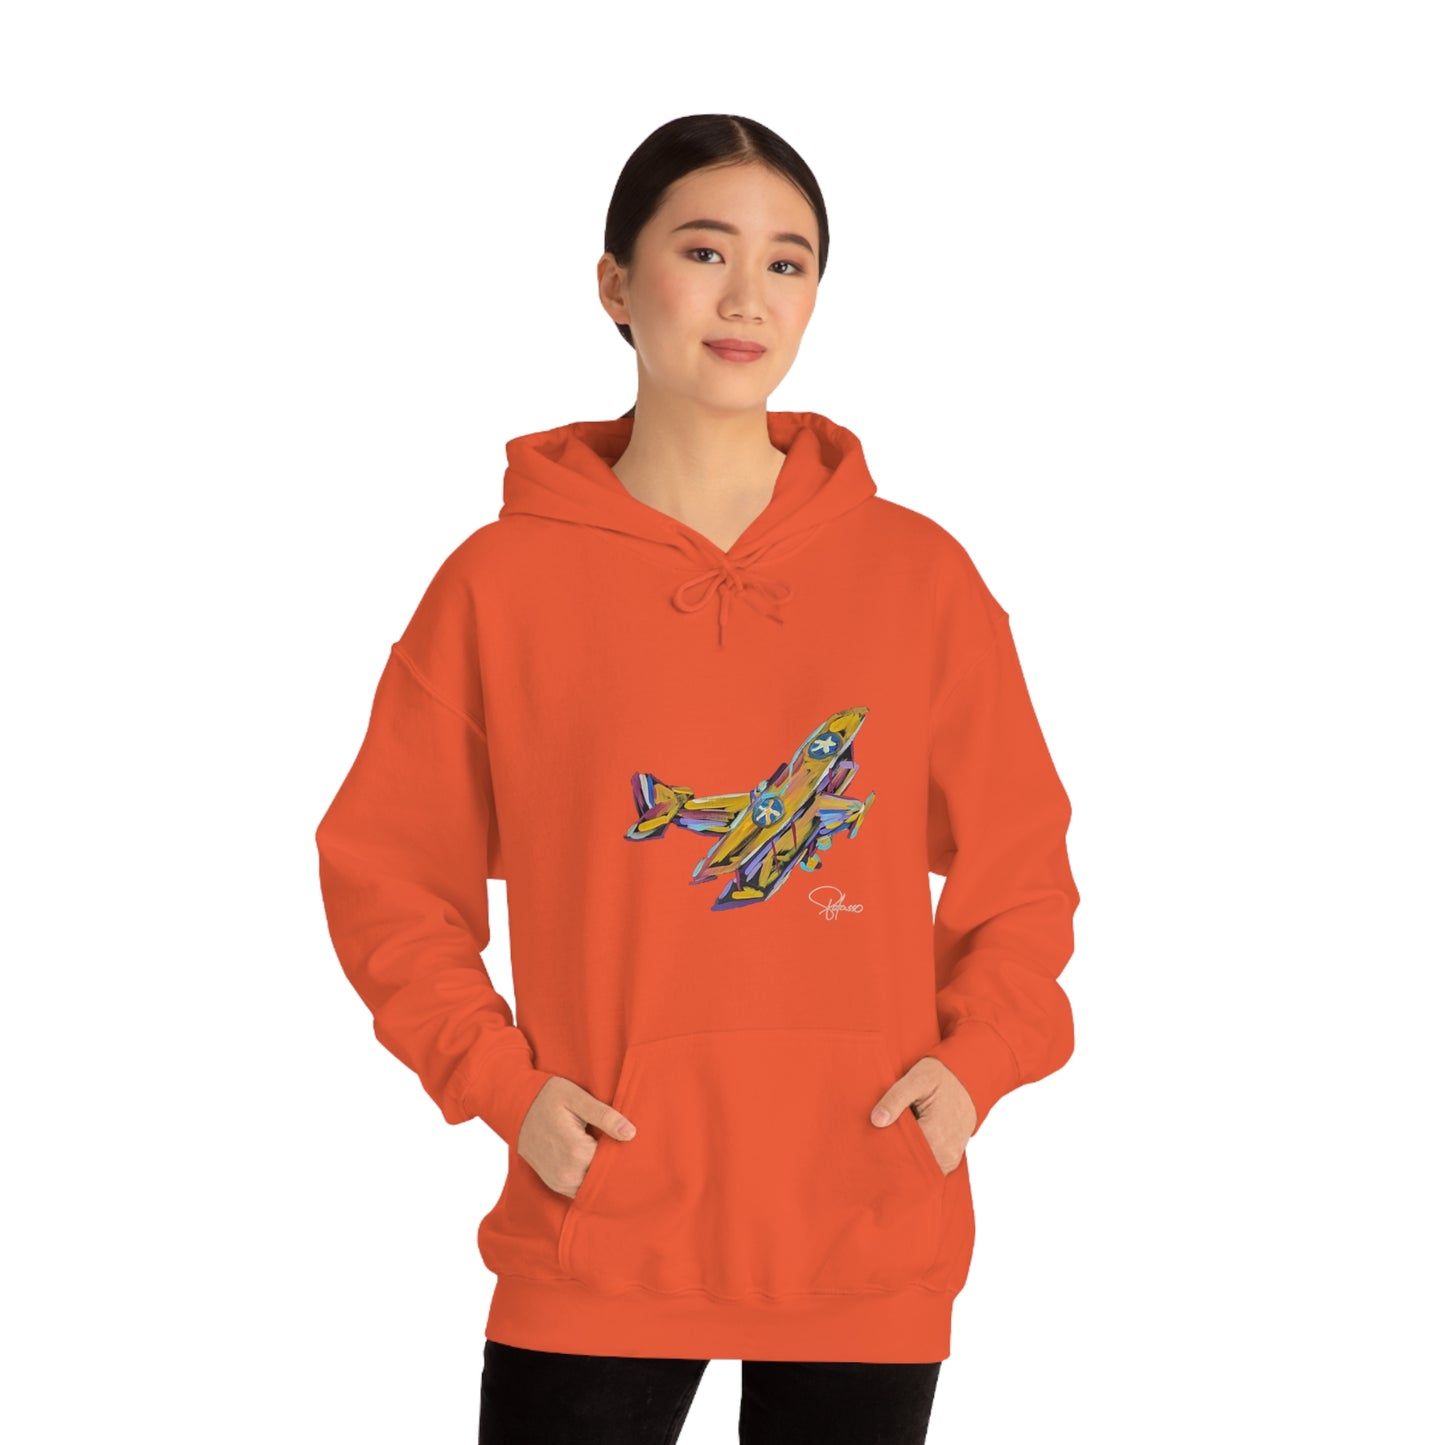 Fly High Towards Your Dreams Airplane Unisex Heavy Blend™ Hooded Sweatshirt | Patcasso